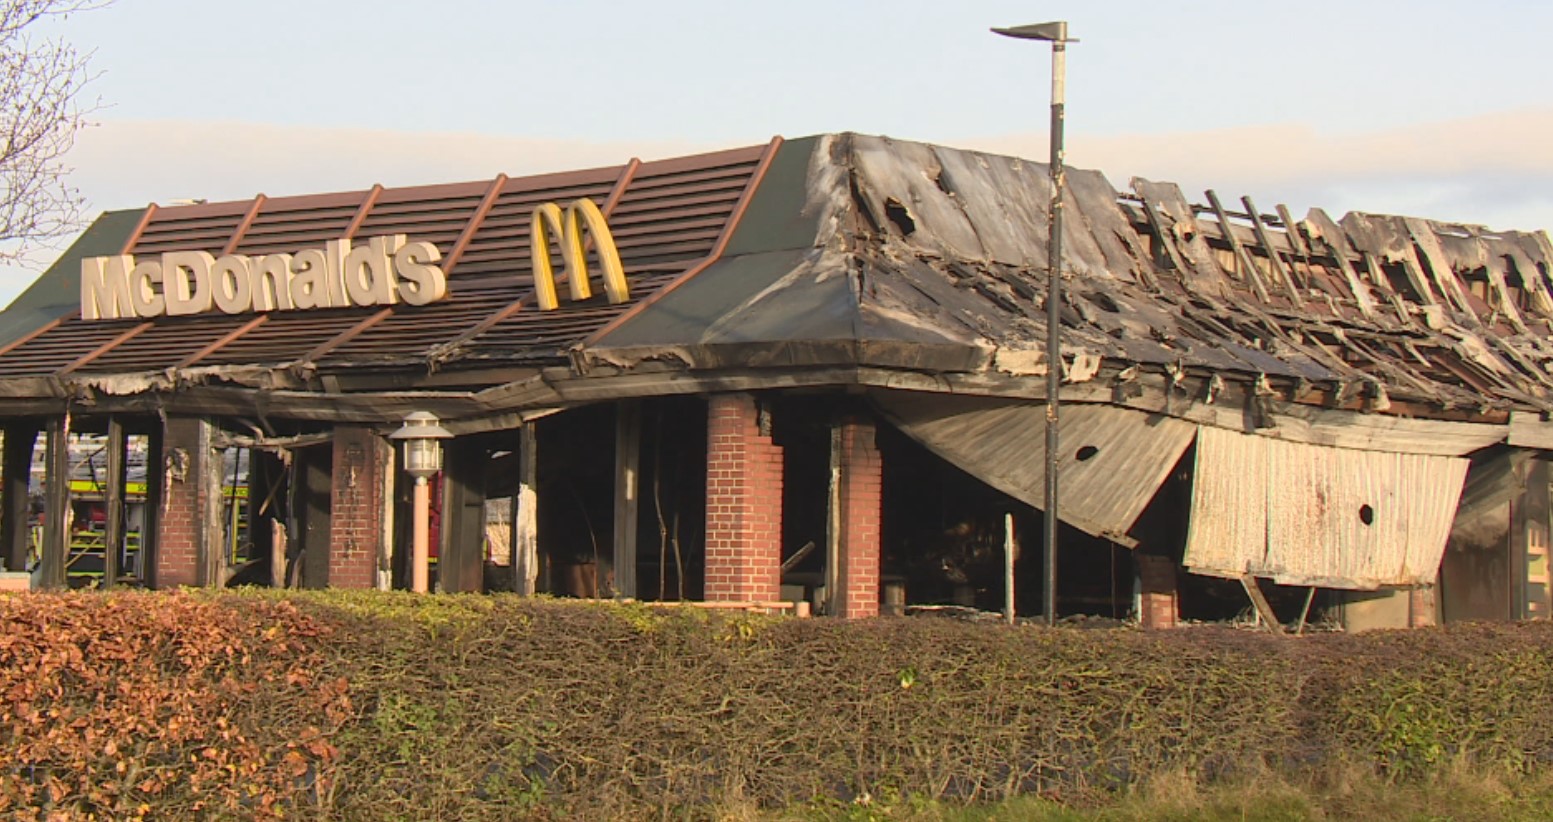 The premises was seen destroyed on Tuesday morning following the fire.